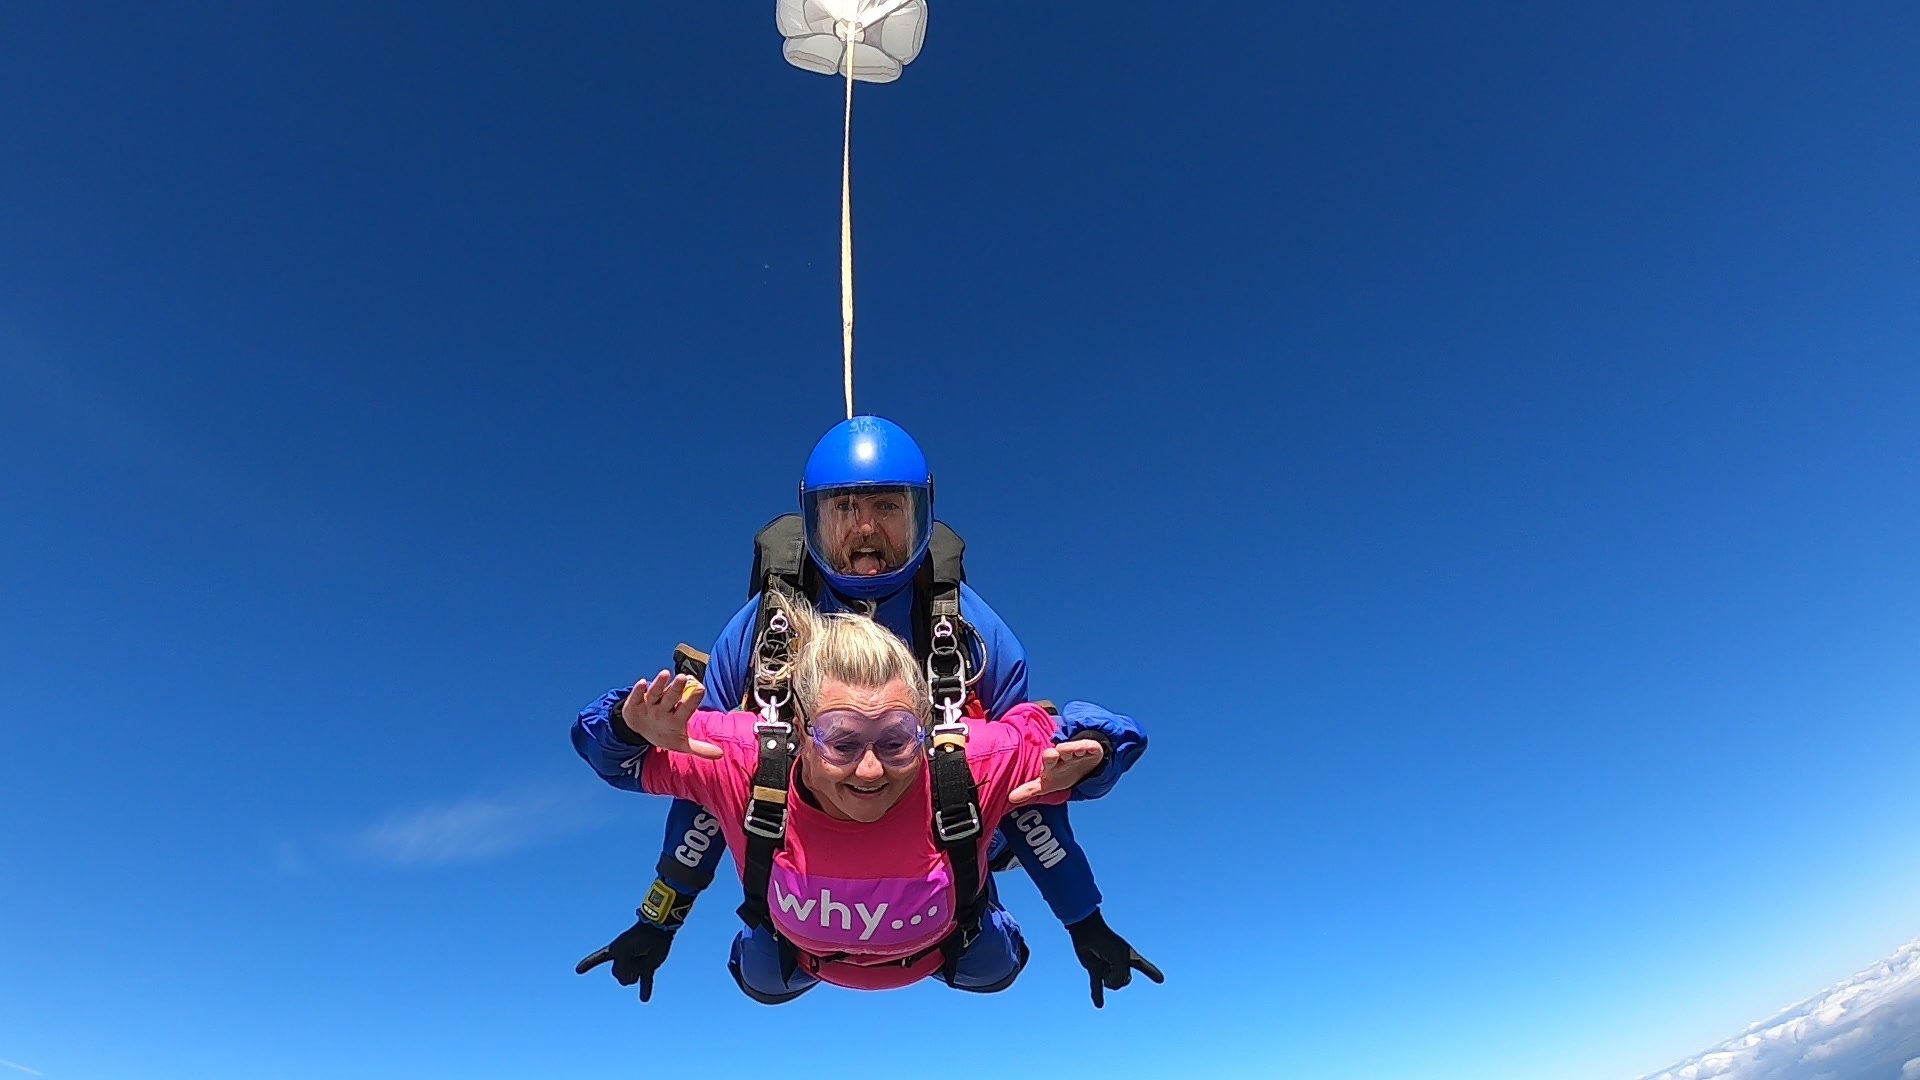 Charity Skydiver in freefall